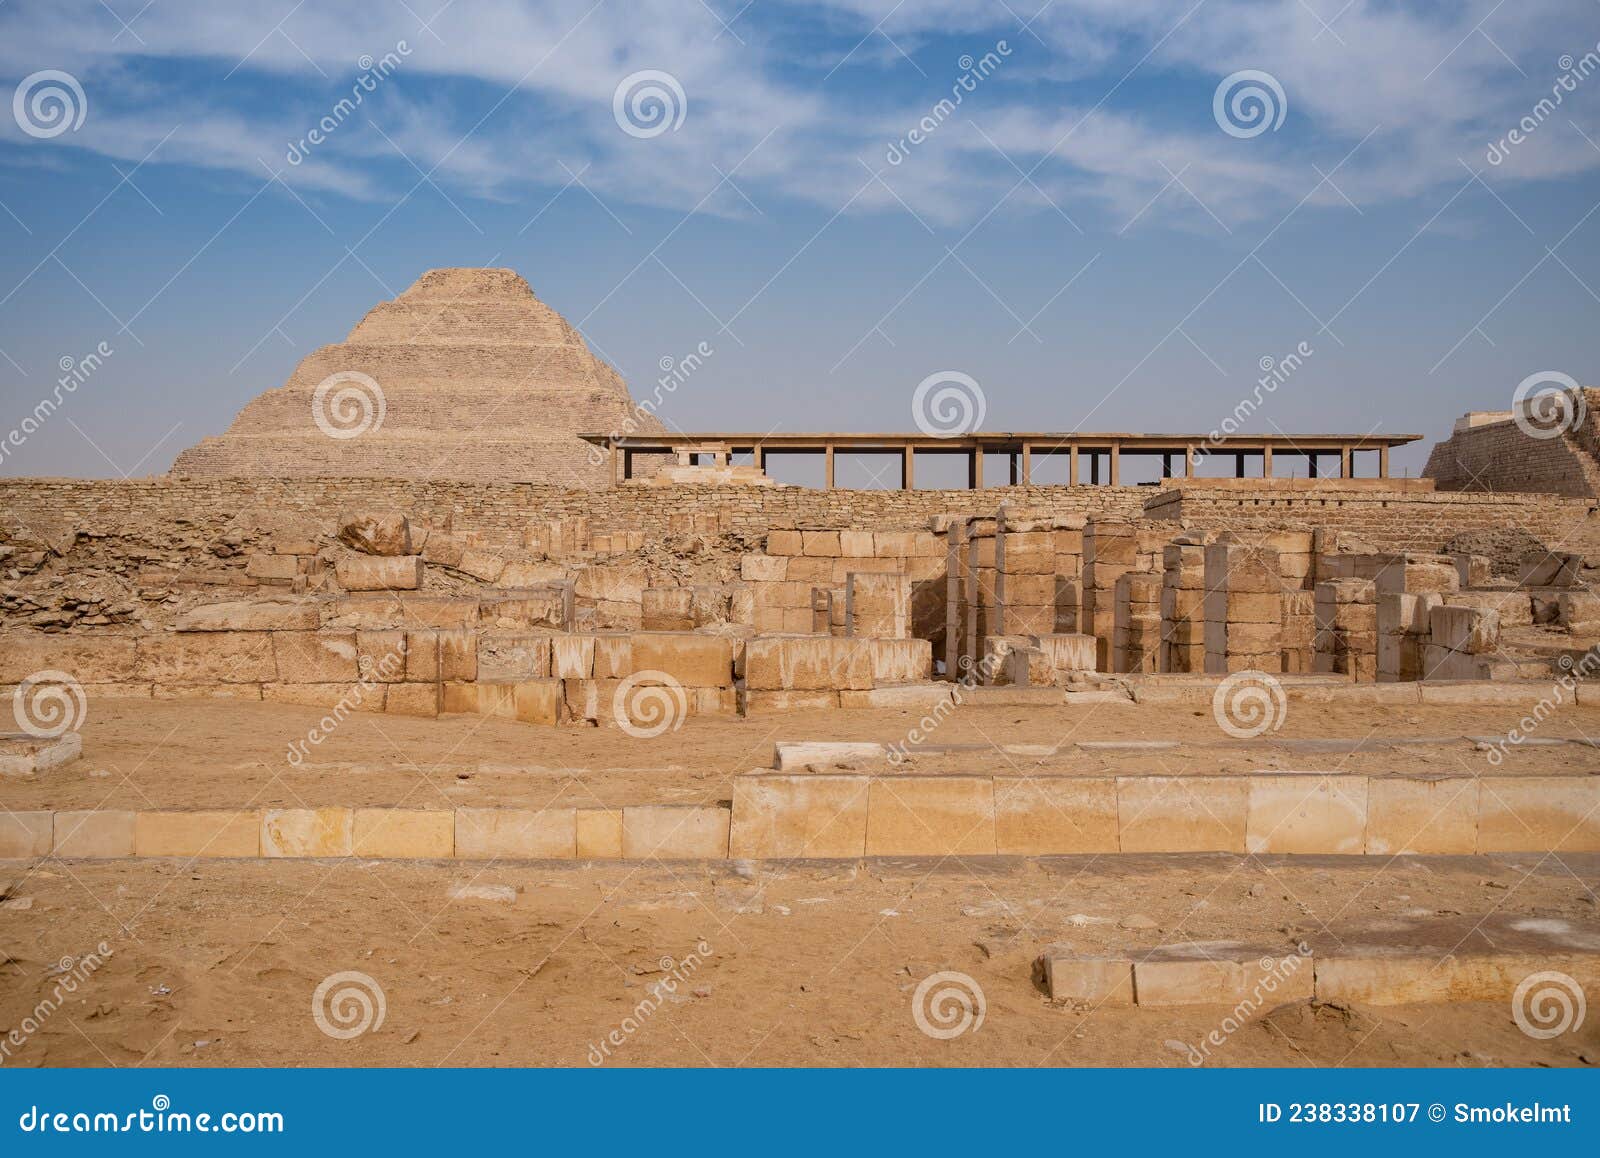 view to step pyramid of djoser in saqqara from pyramid of unas, an archeological remain in the saqqara necropolis, egypt